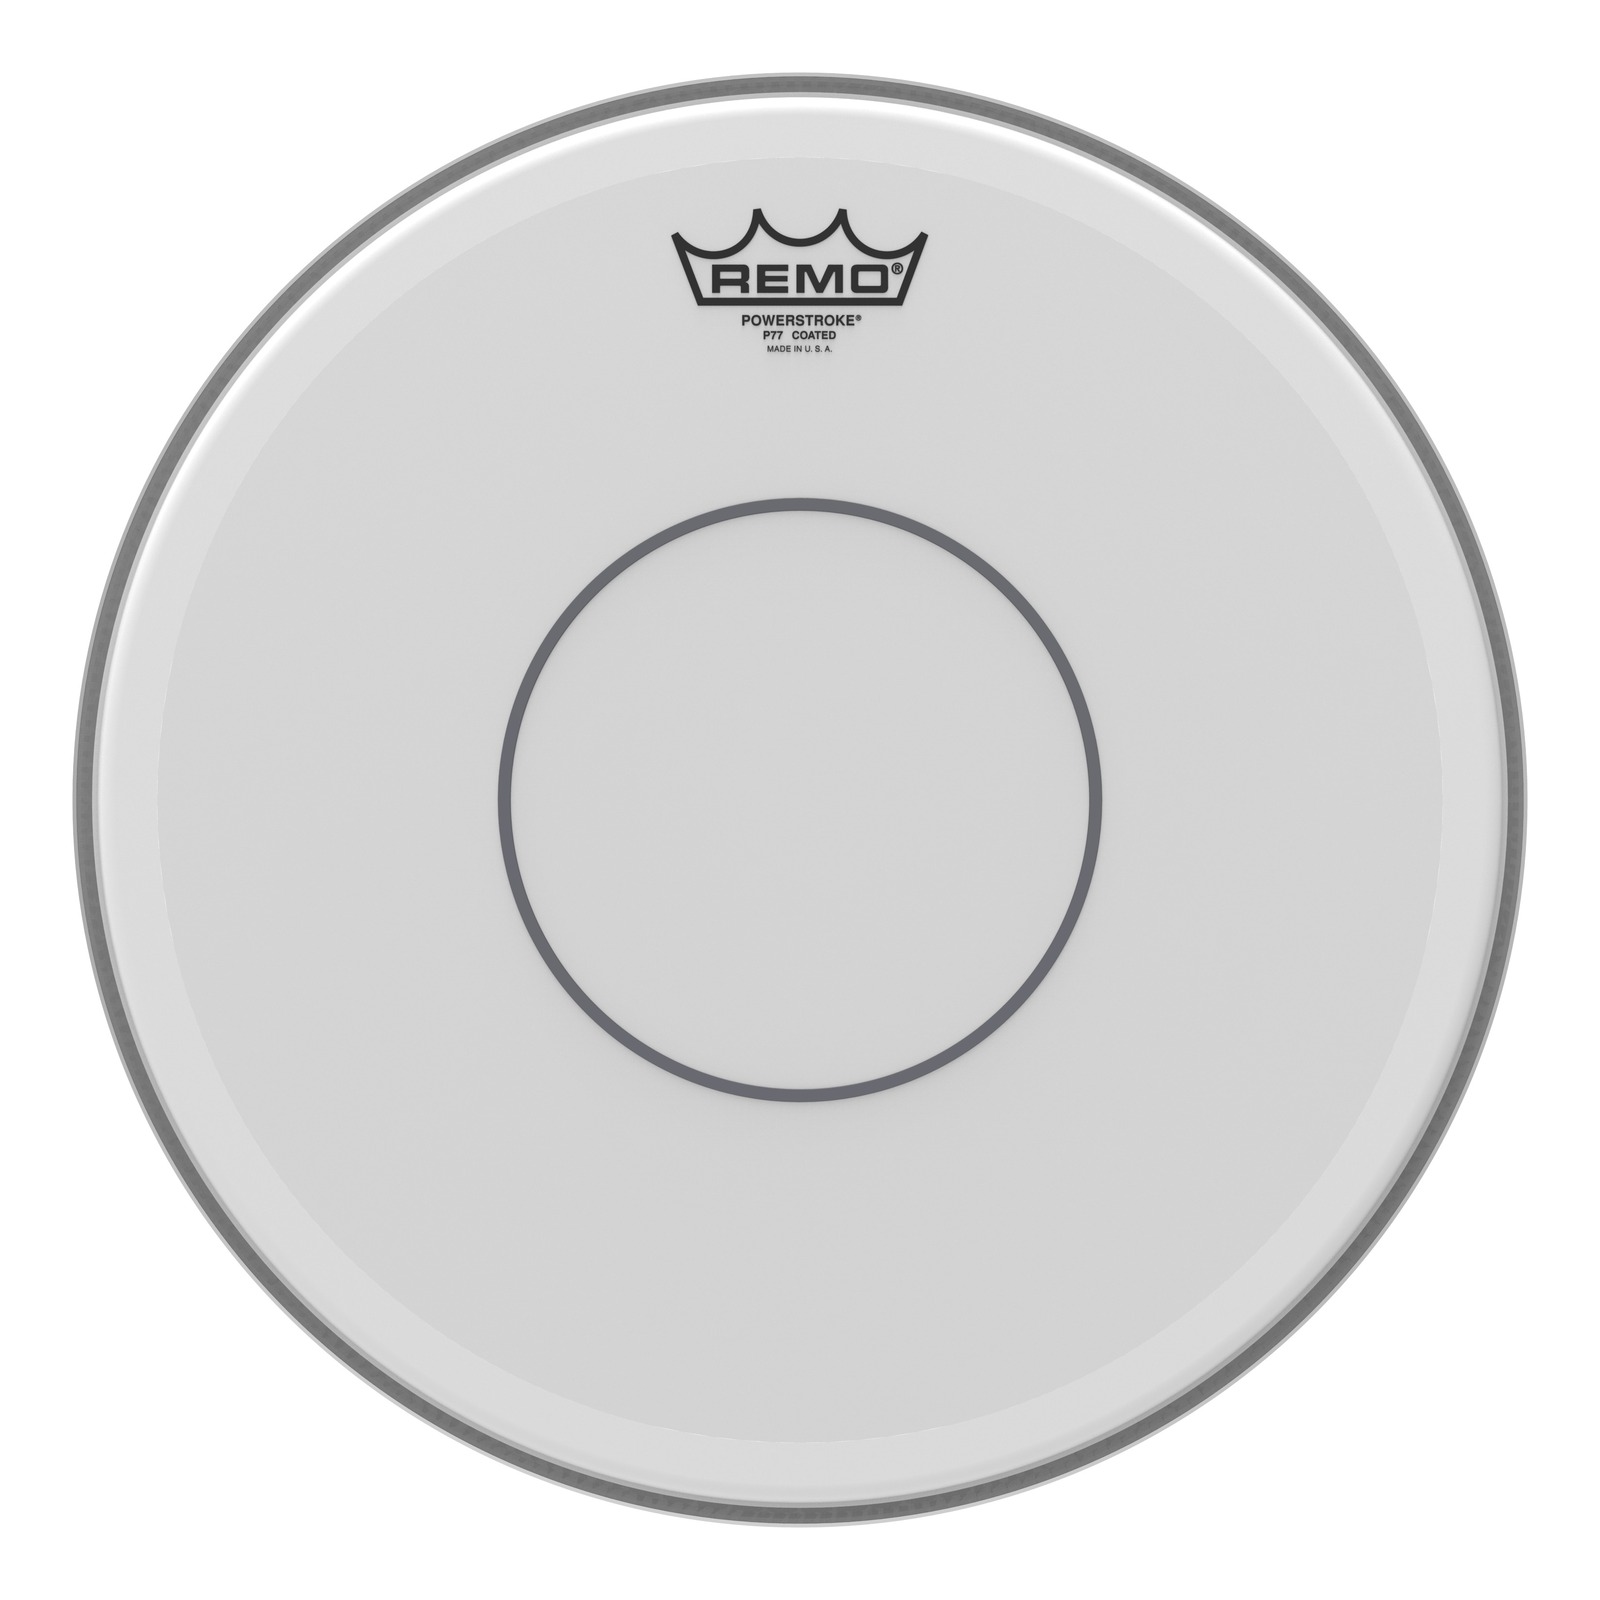 Powerstroke® 77 Coated Clear Dot Snare Drumhead - Top Clear Dot, 14"